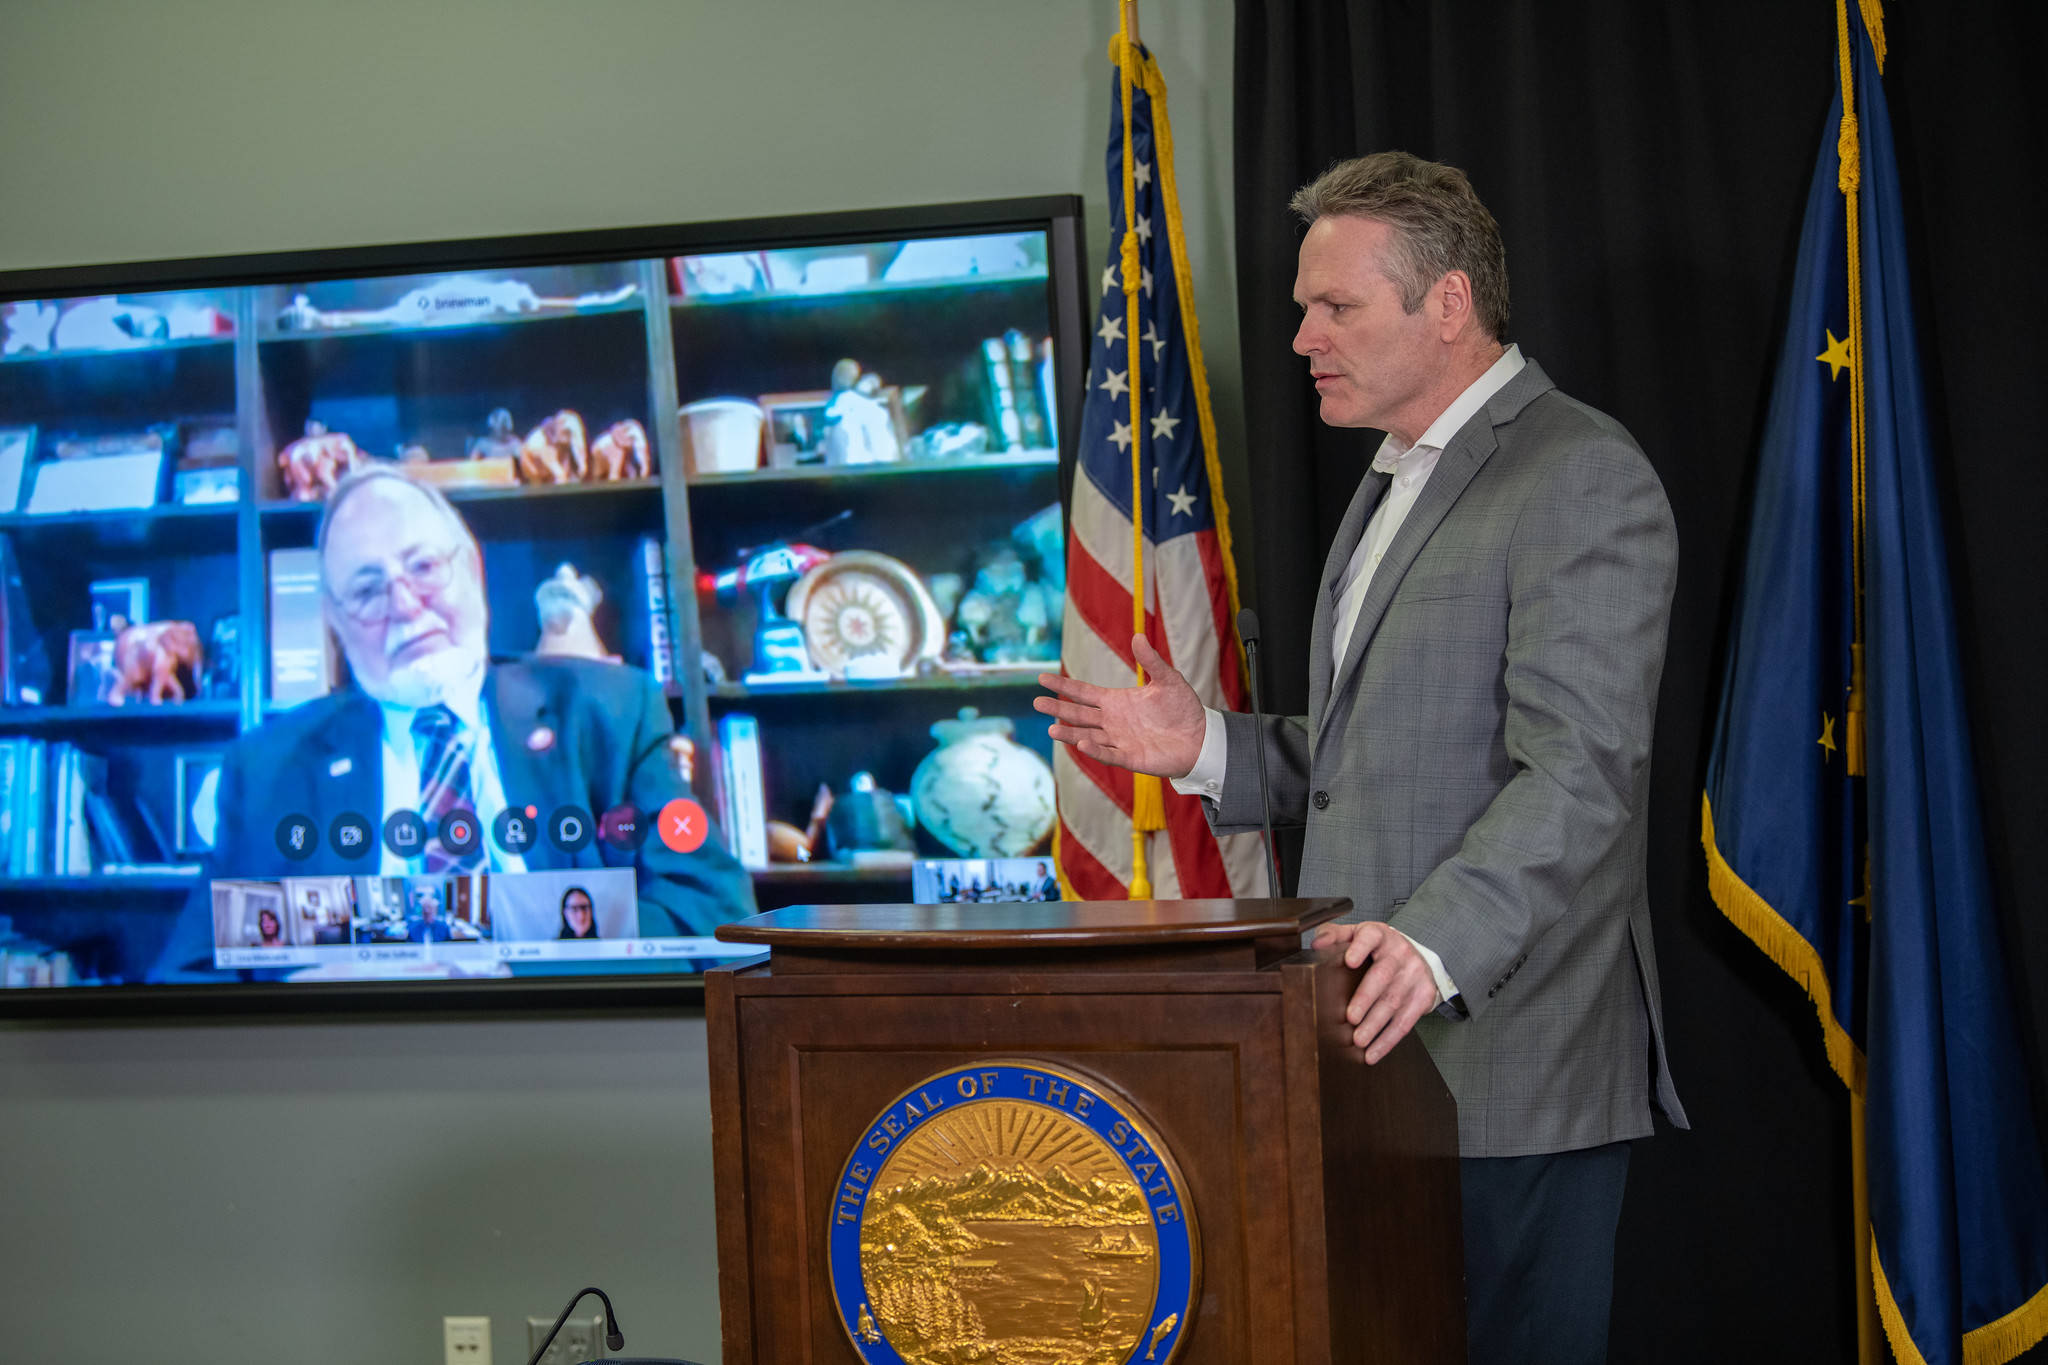 Gov. Mike Dunleavy speaks while Rep. Don Young, R-Alaska, looks on via a video feed at a press conference on March 30, 2020 in the Atwood Building in Anchorage, Alaska. (Photo courtesy Office of the Governor)